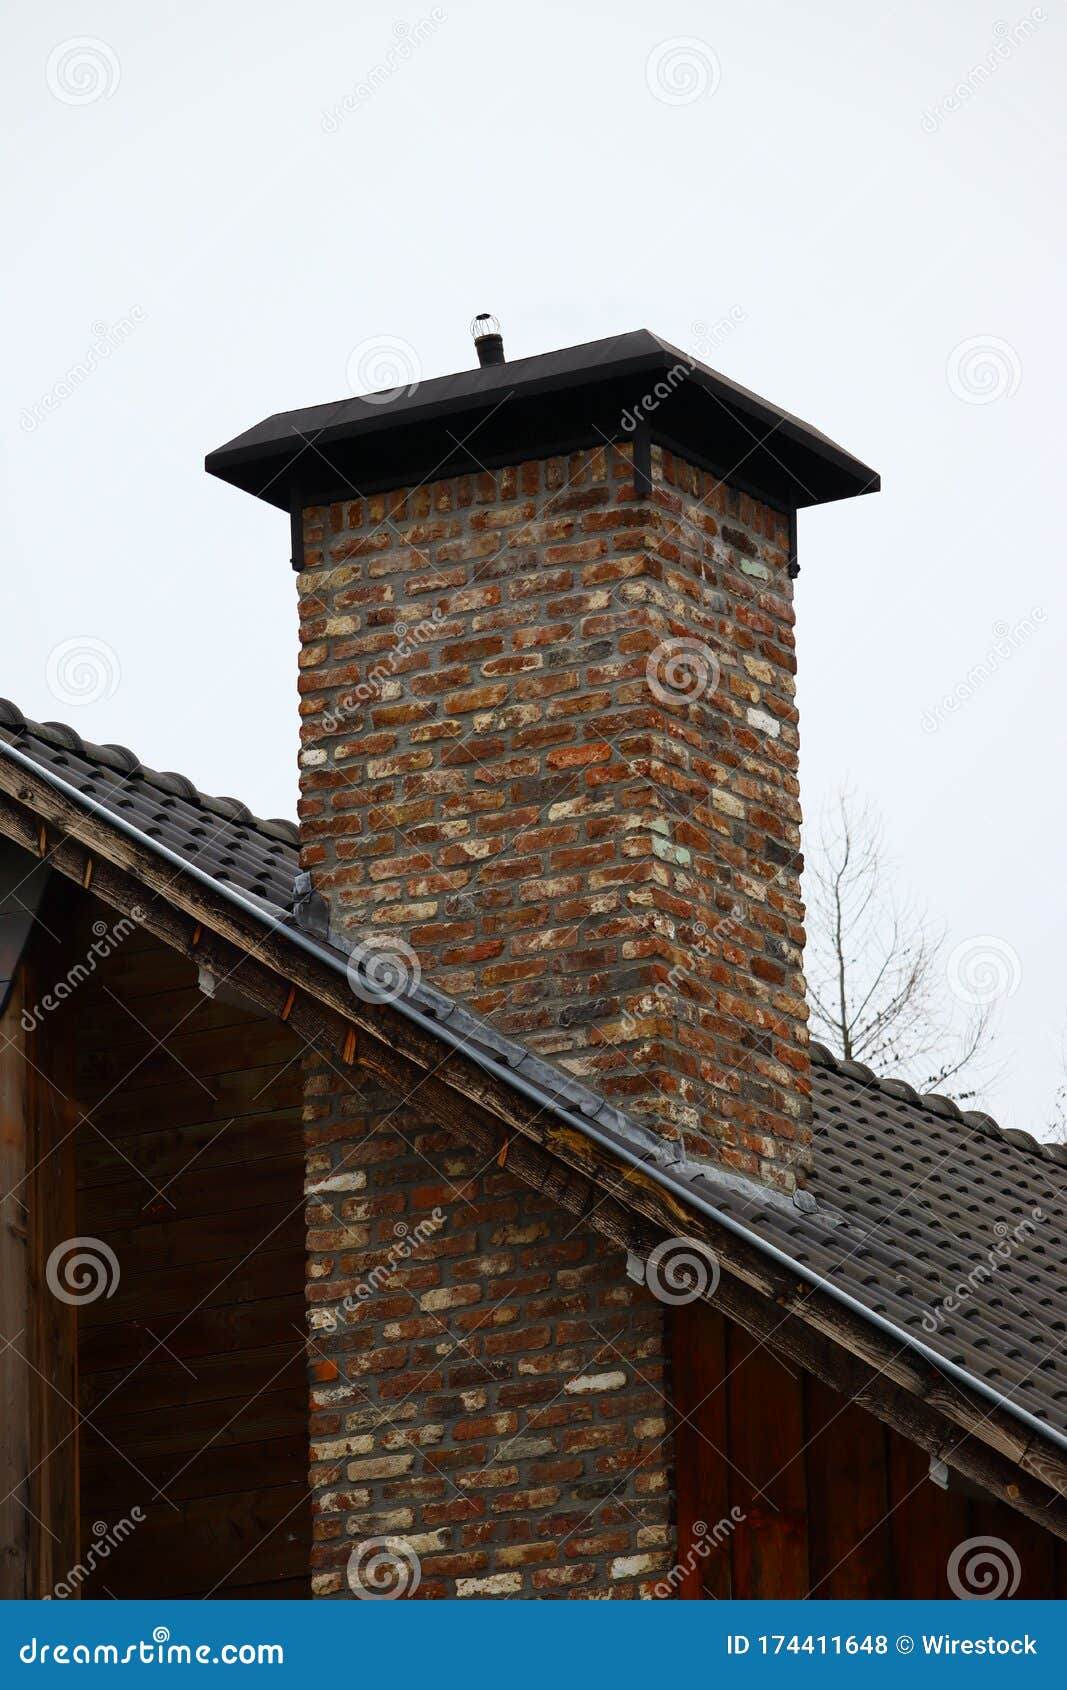 vertical shot of a brick chimney with a cloudy sky in the background